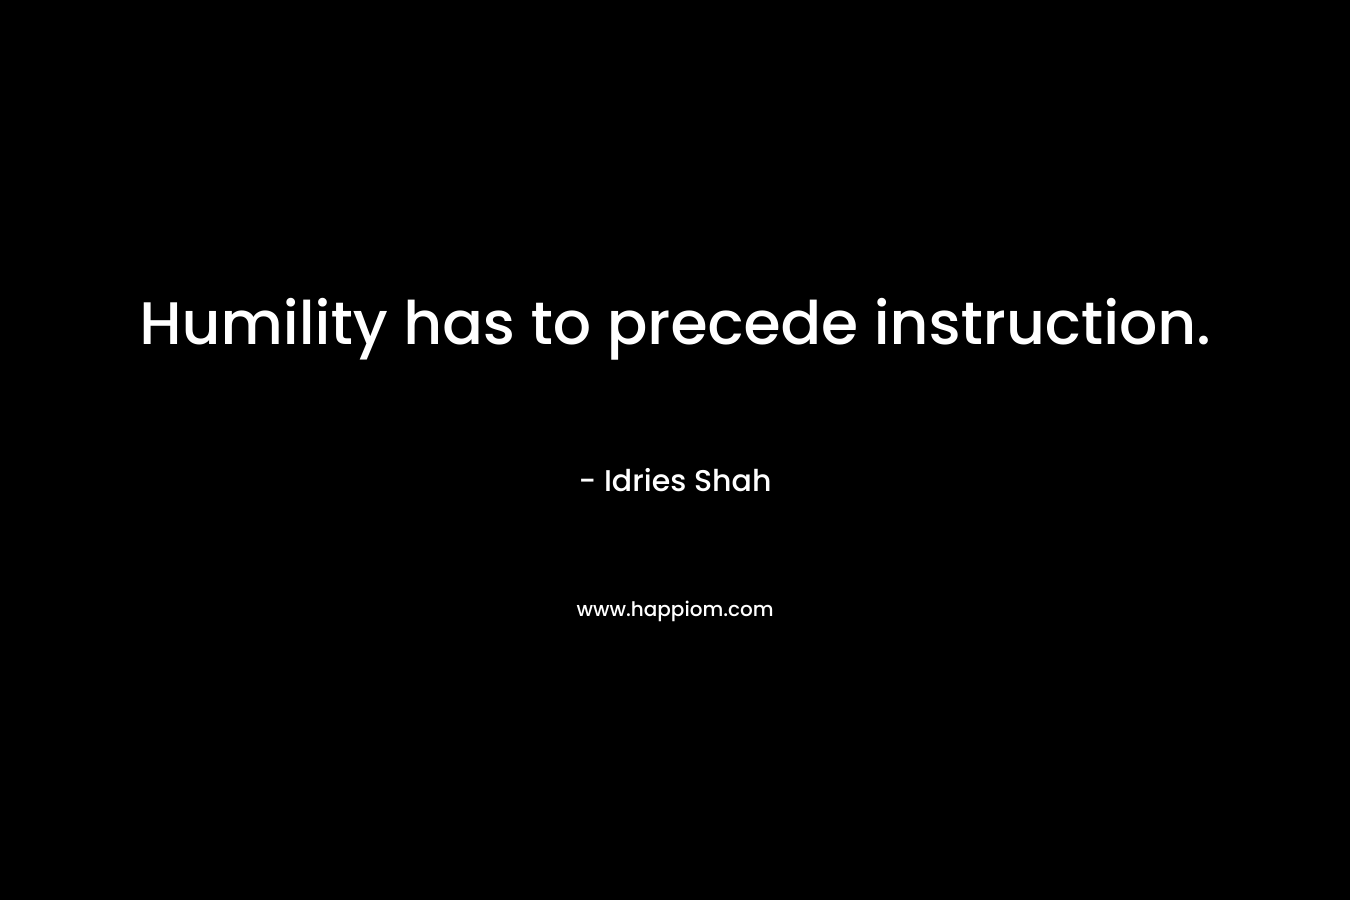 Humility has to precede instruction. – Idries Shah